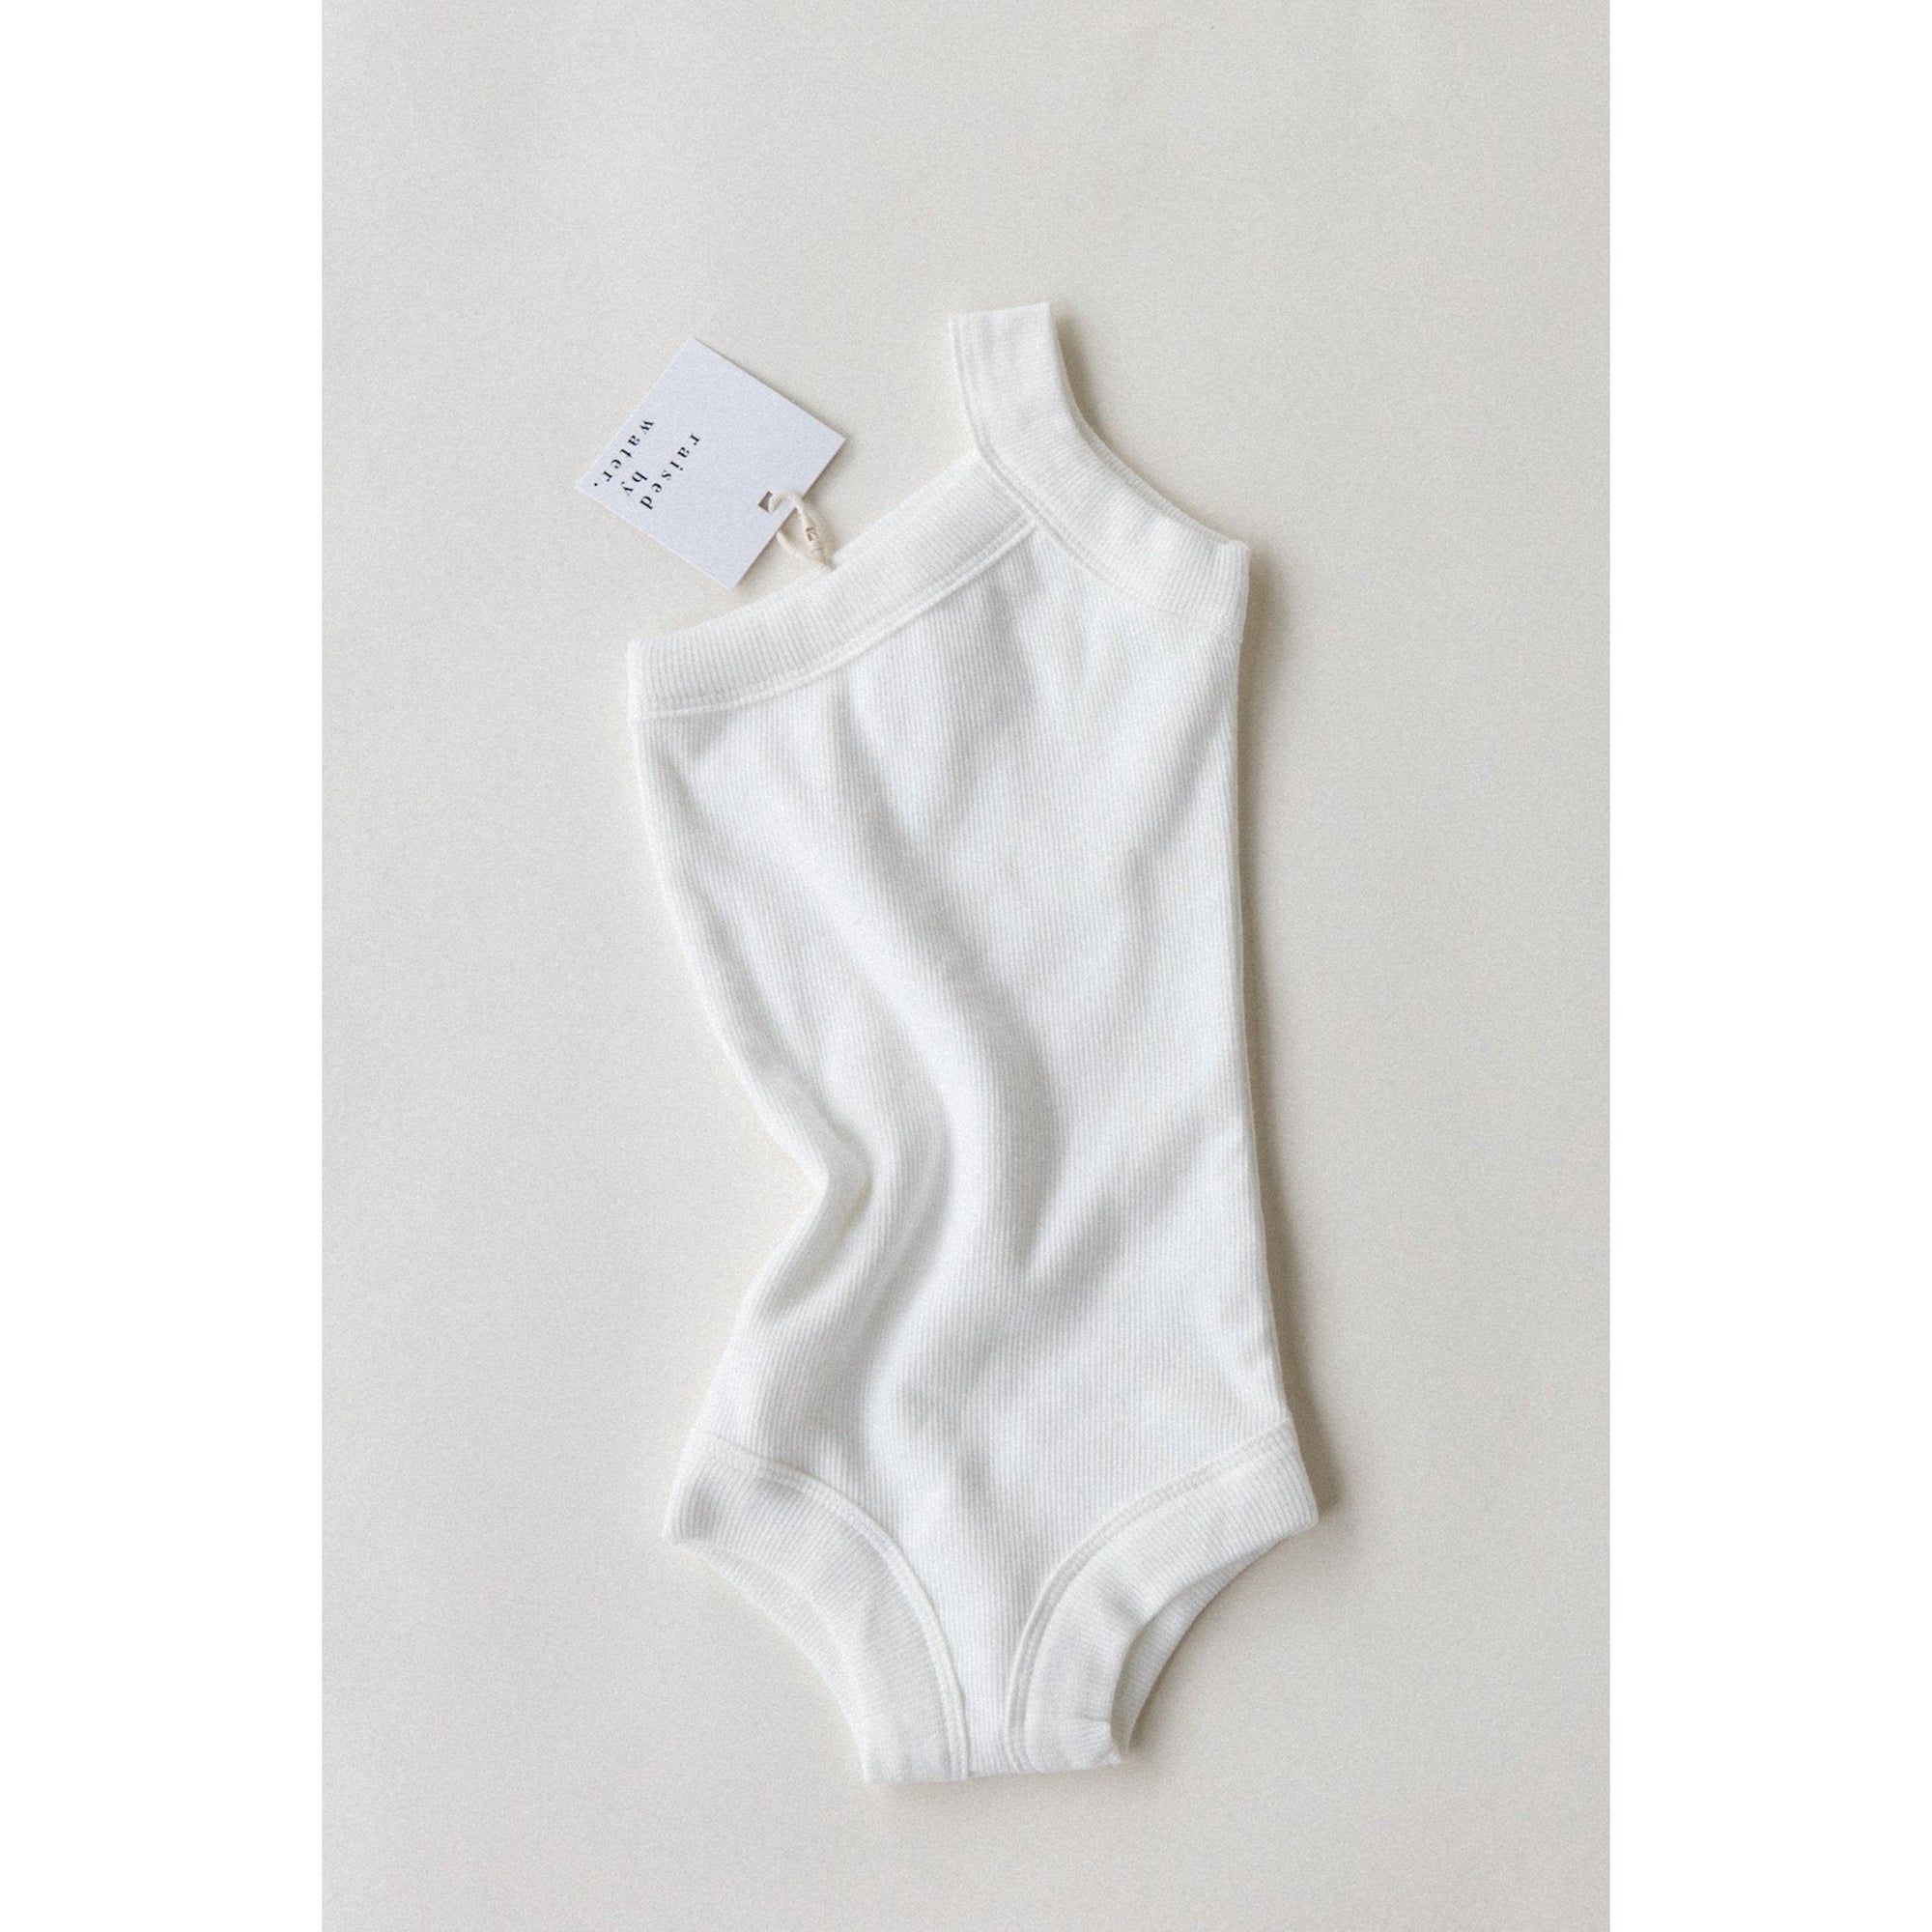 raised by water x shop kai blue one strap body suit